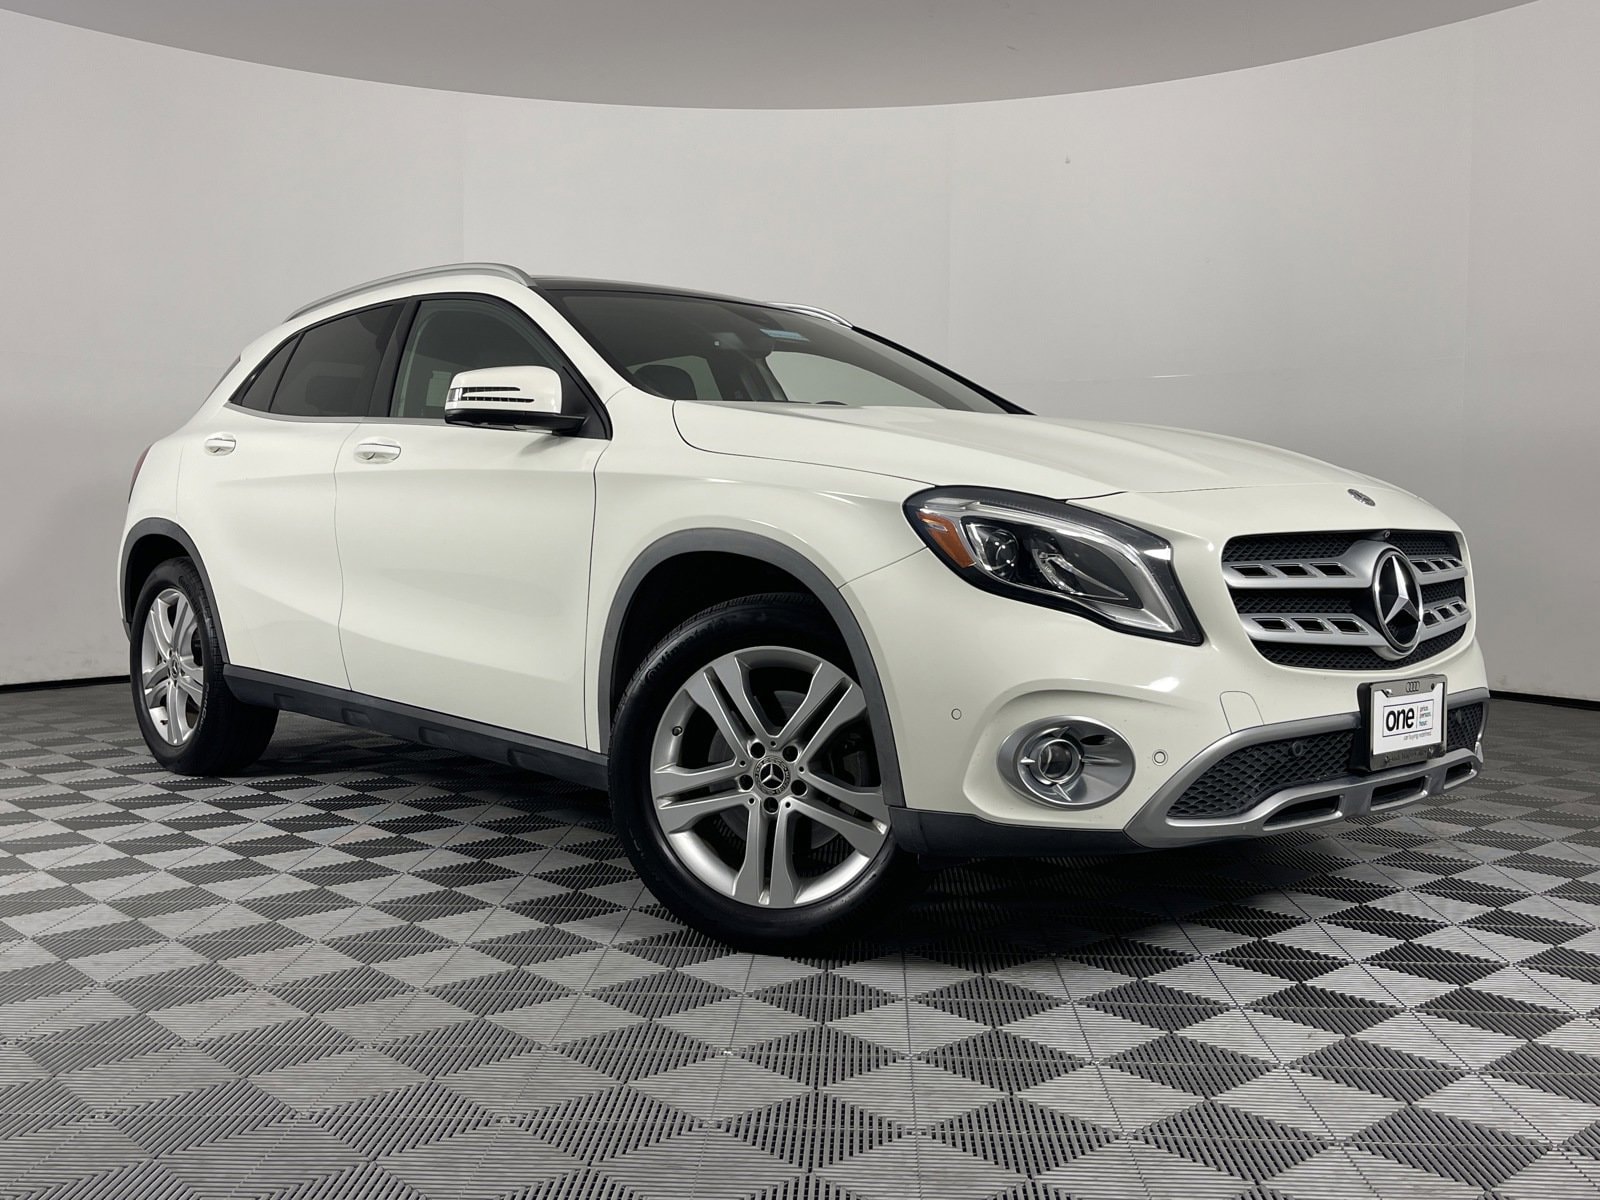 Used 2018 Mercedes-Benz GLA-Class GLA250 with VIN WDCTG4GB8JJ437256 for sale in Fairfield, CA